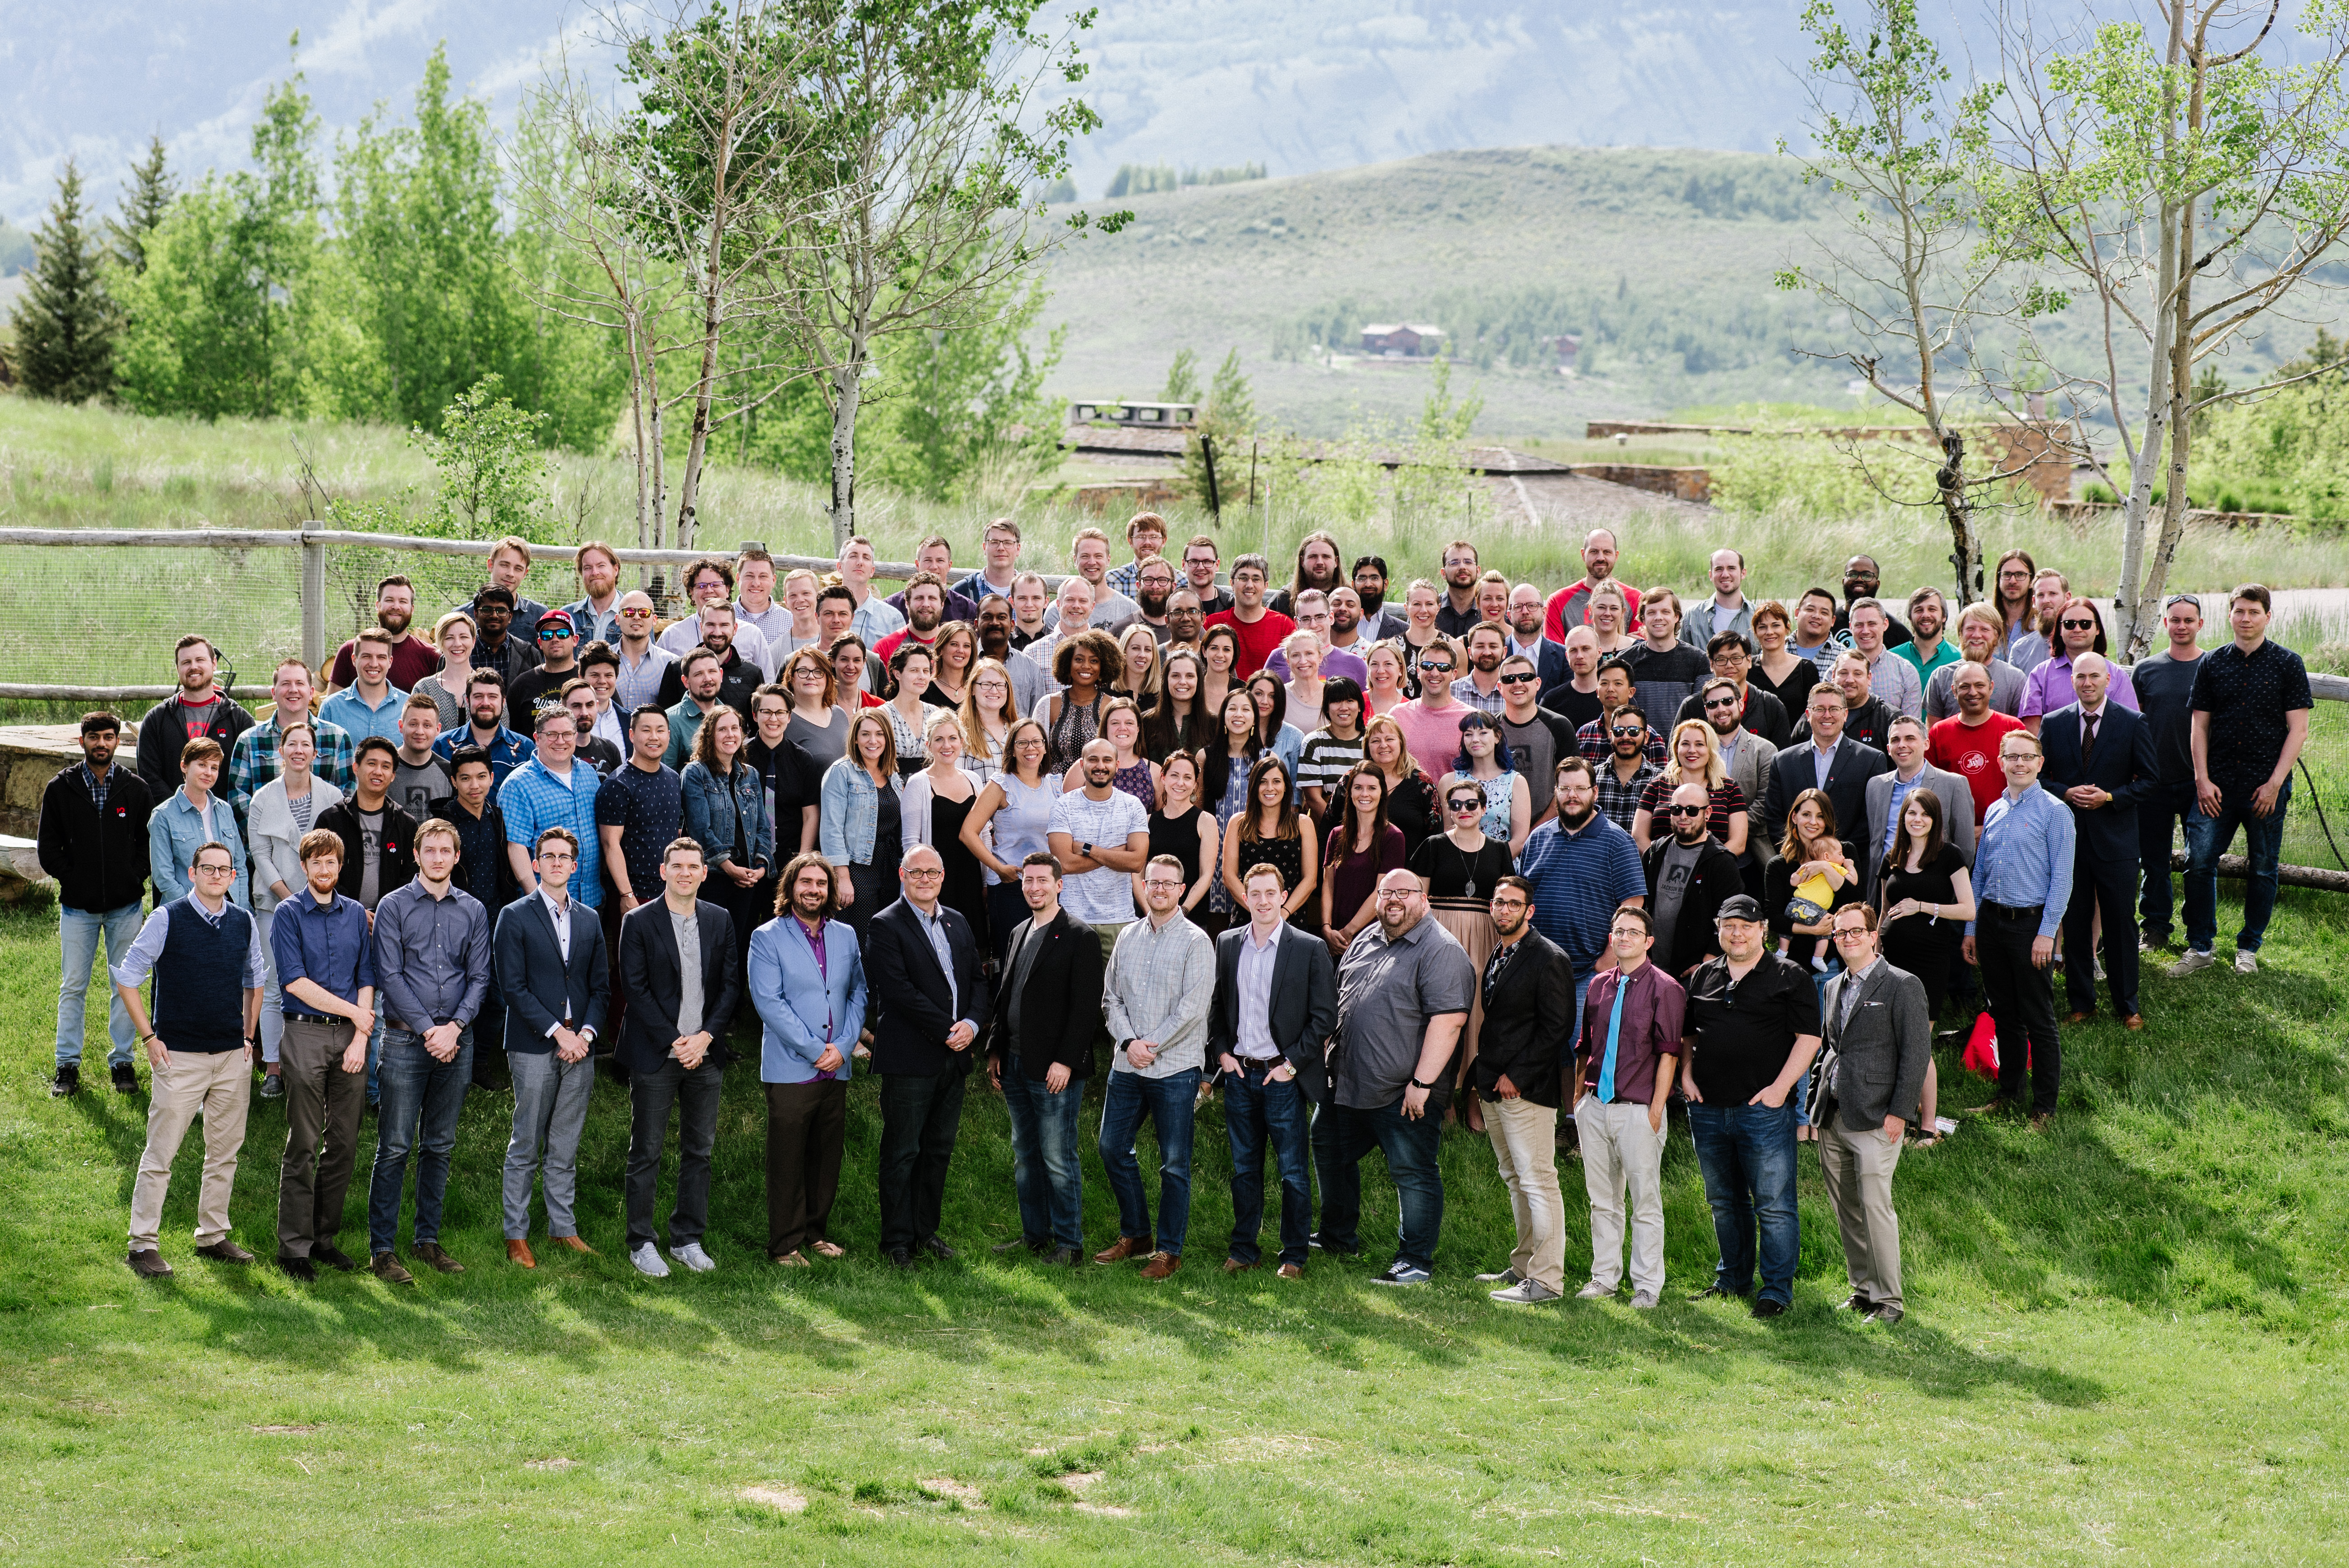 Group photo of 10up outside at the annual 10up summit